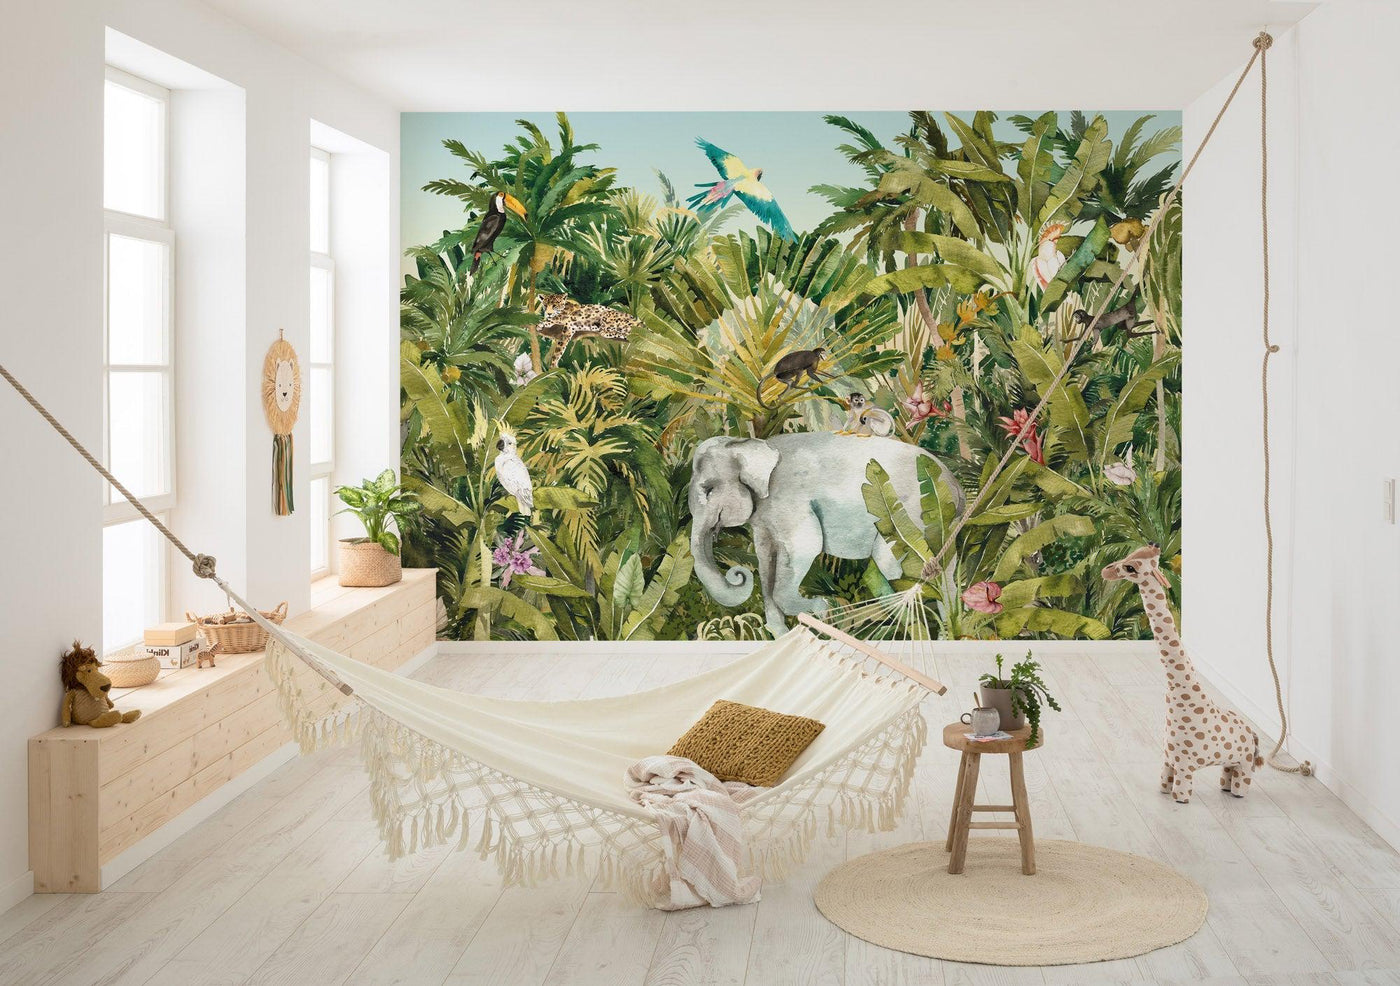 Jungle Expedition Mural Wallpaper-Wall Decor-ART WALLPAPER, ECO MURALS, JUNGLE WALLPAPER, KIDS WALLPAPERS, MURALS, MURALS / WALLPAPERS, NON-WOVEN WALLPAPER, PALM WALLPAPER, TROPICAL MURAL, TROPICAL WALLPAPERS-Forest Homes-Nature inspired decor-Nature decor